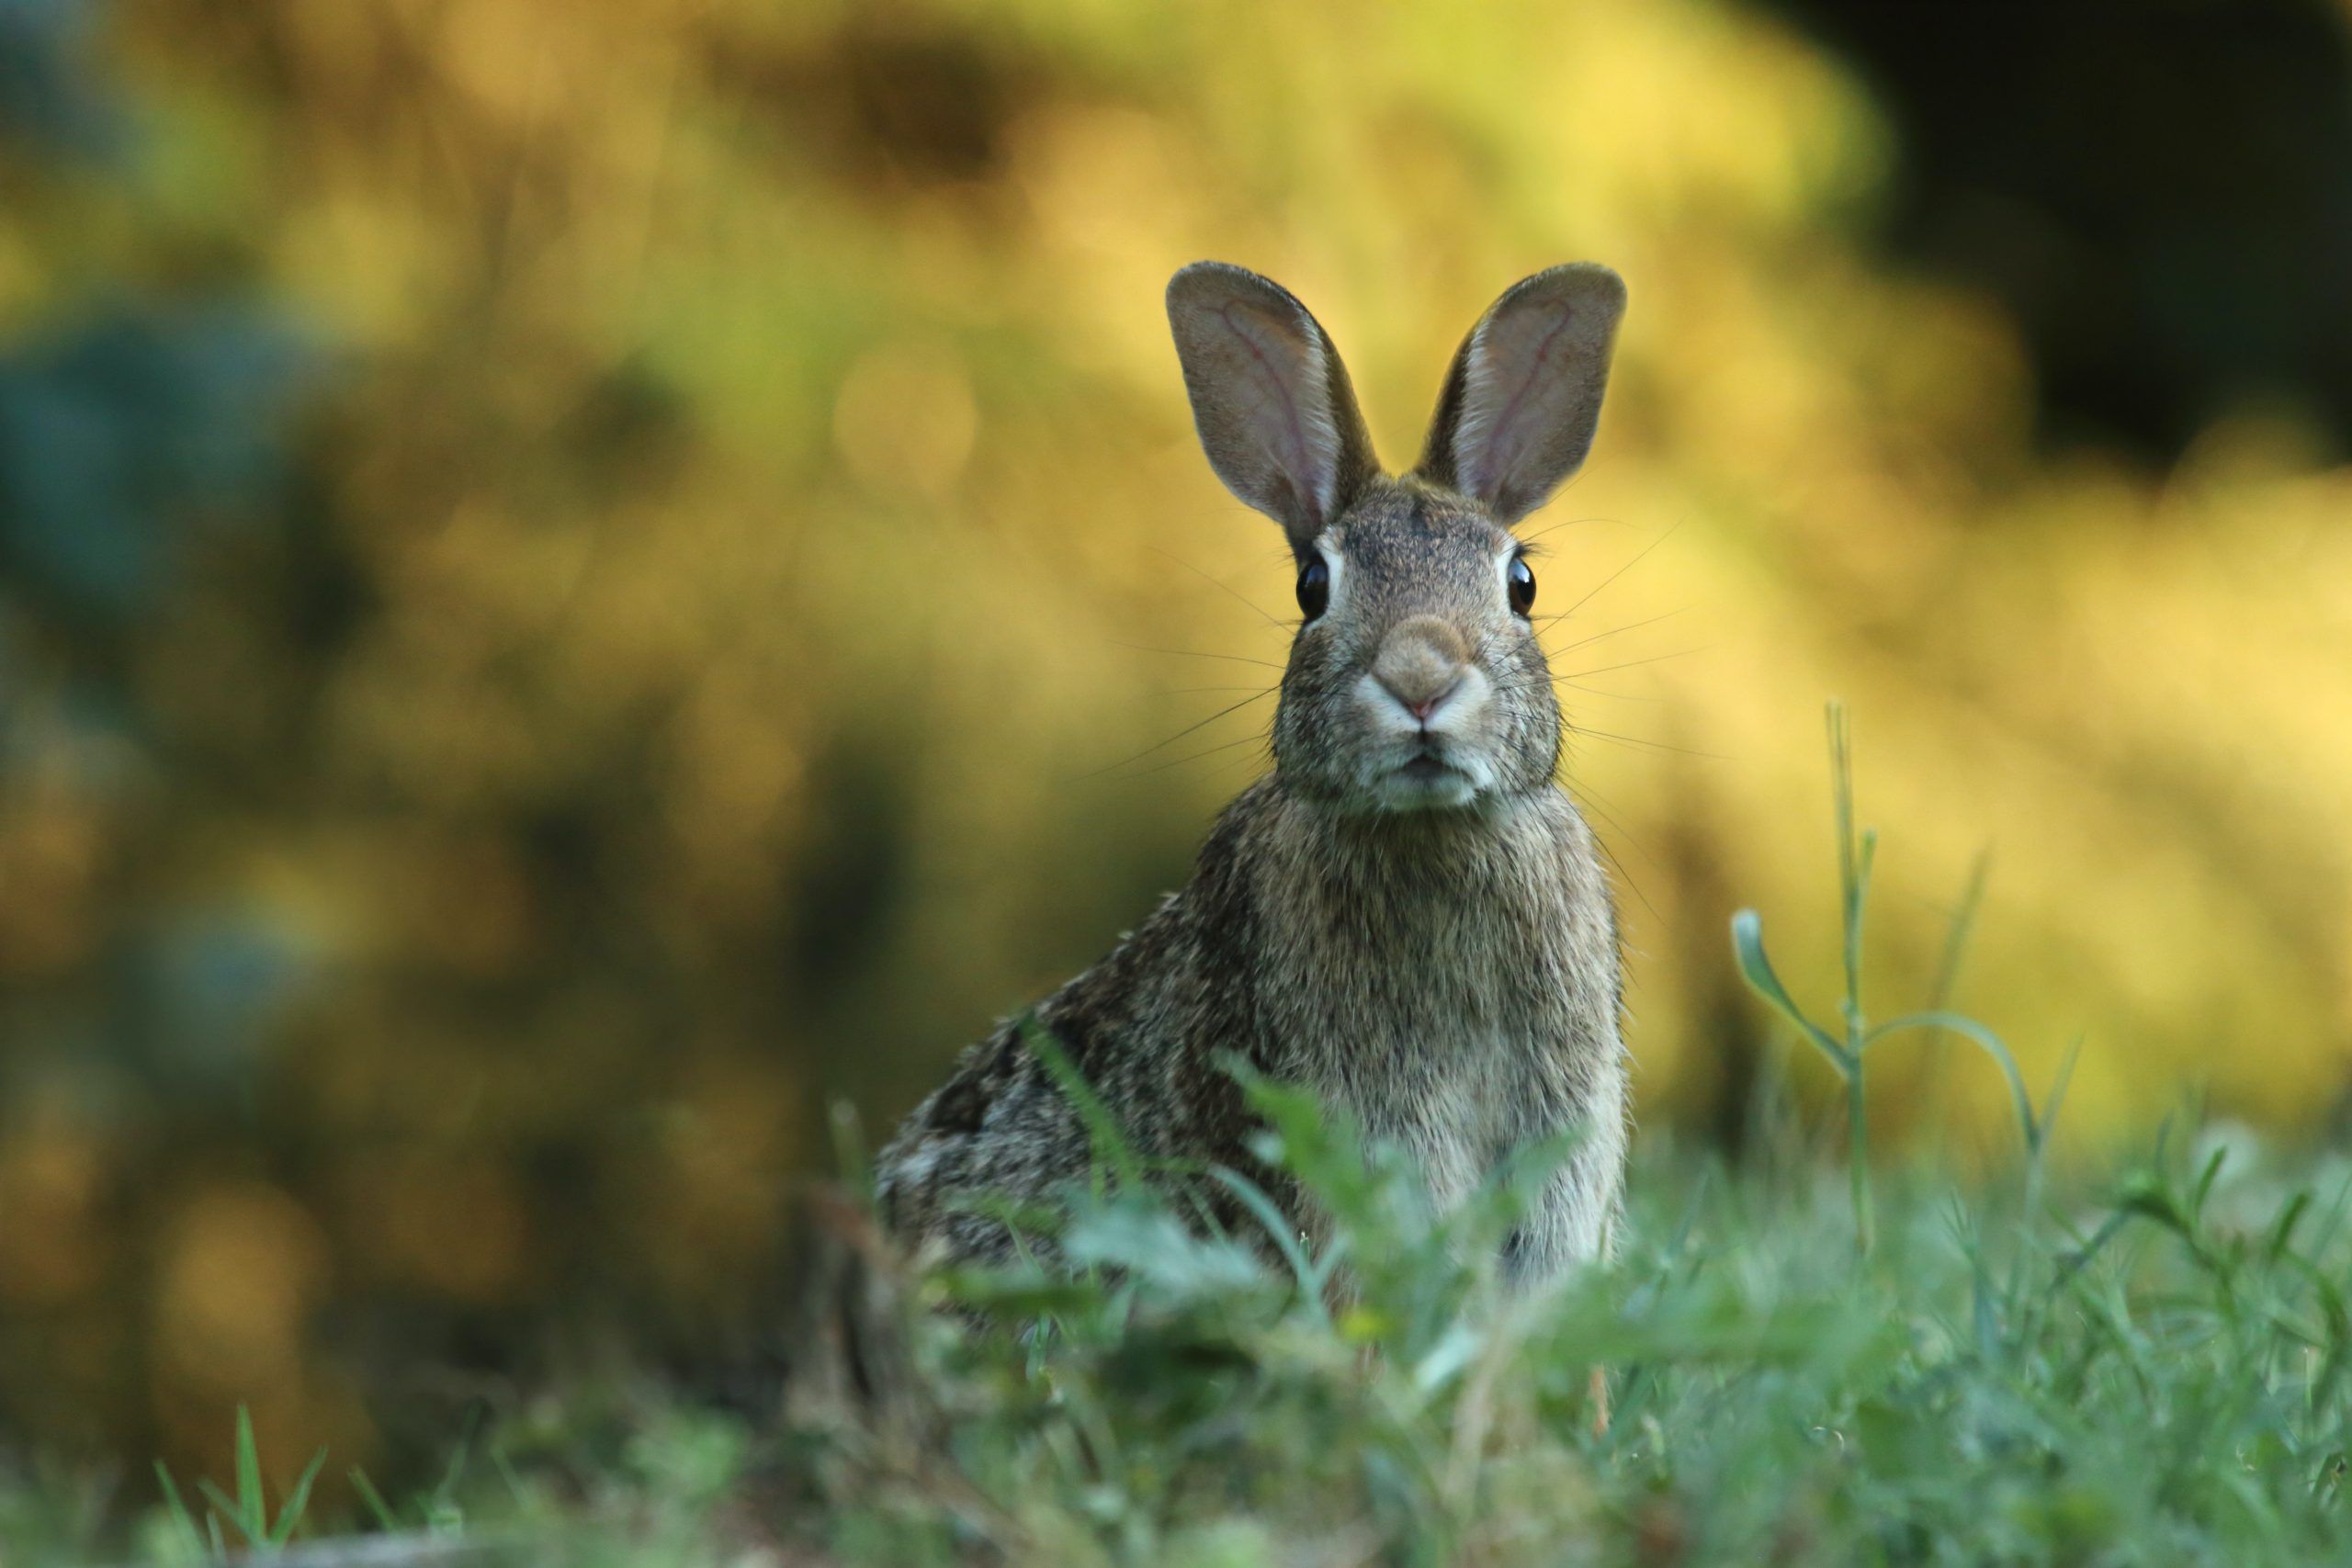 How every zodiac animal can find success in the Year of the Rabbit